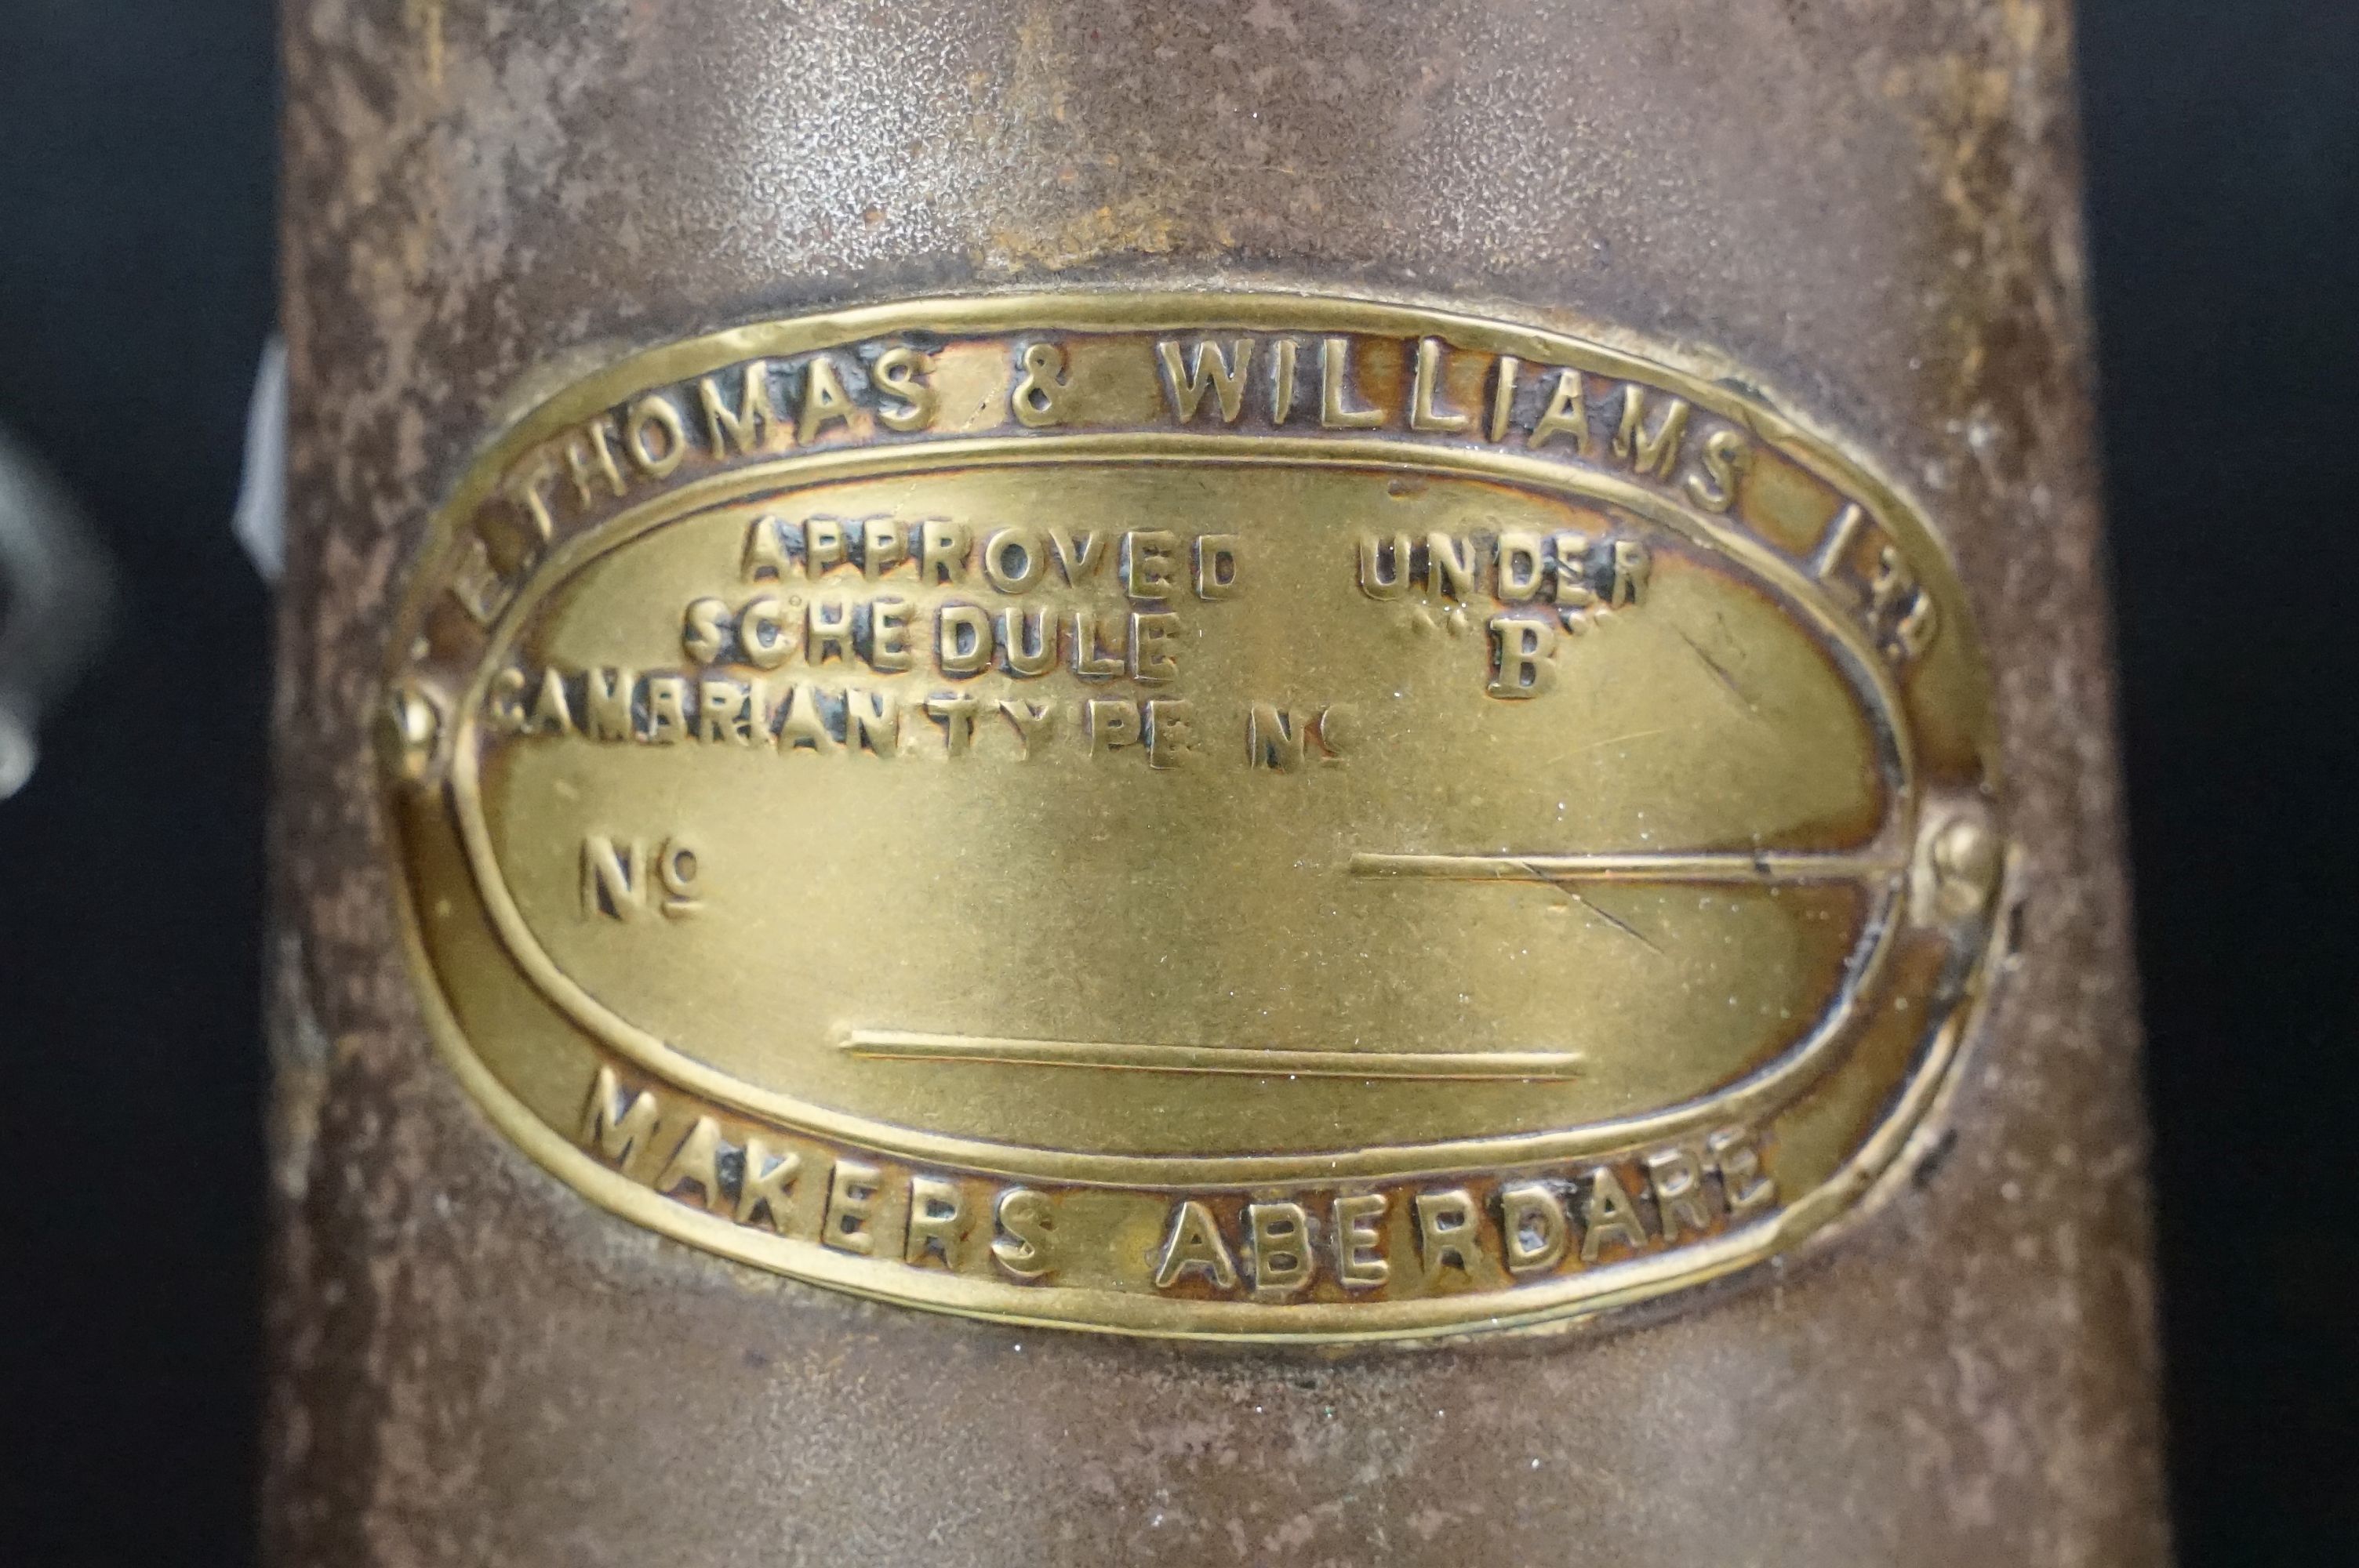 Group of six miners lamps to include E. Thomas & Williams Ltd, Ferndale Coal & Mining Co., The - Image 3 of 6